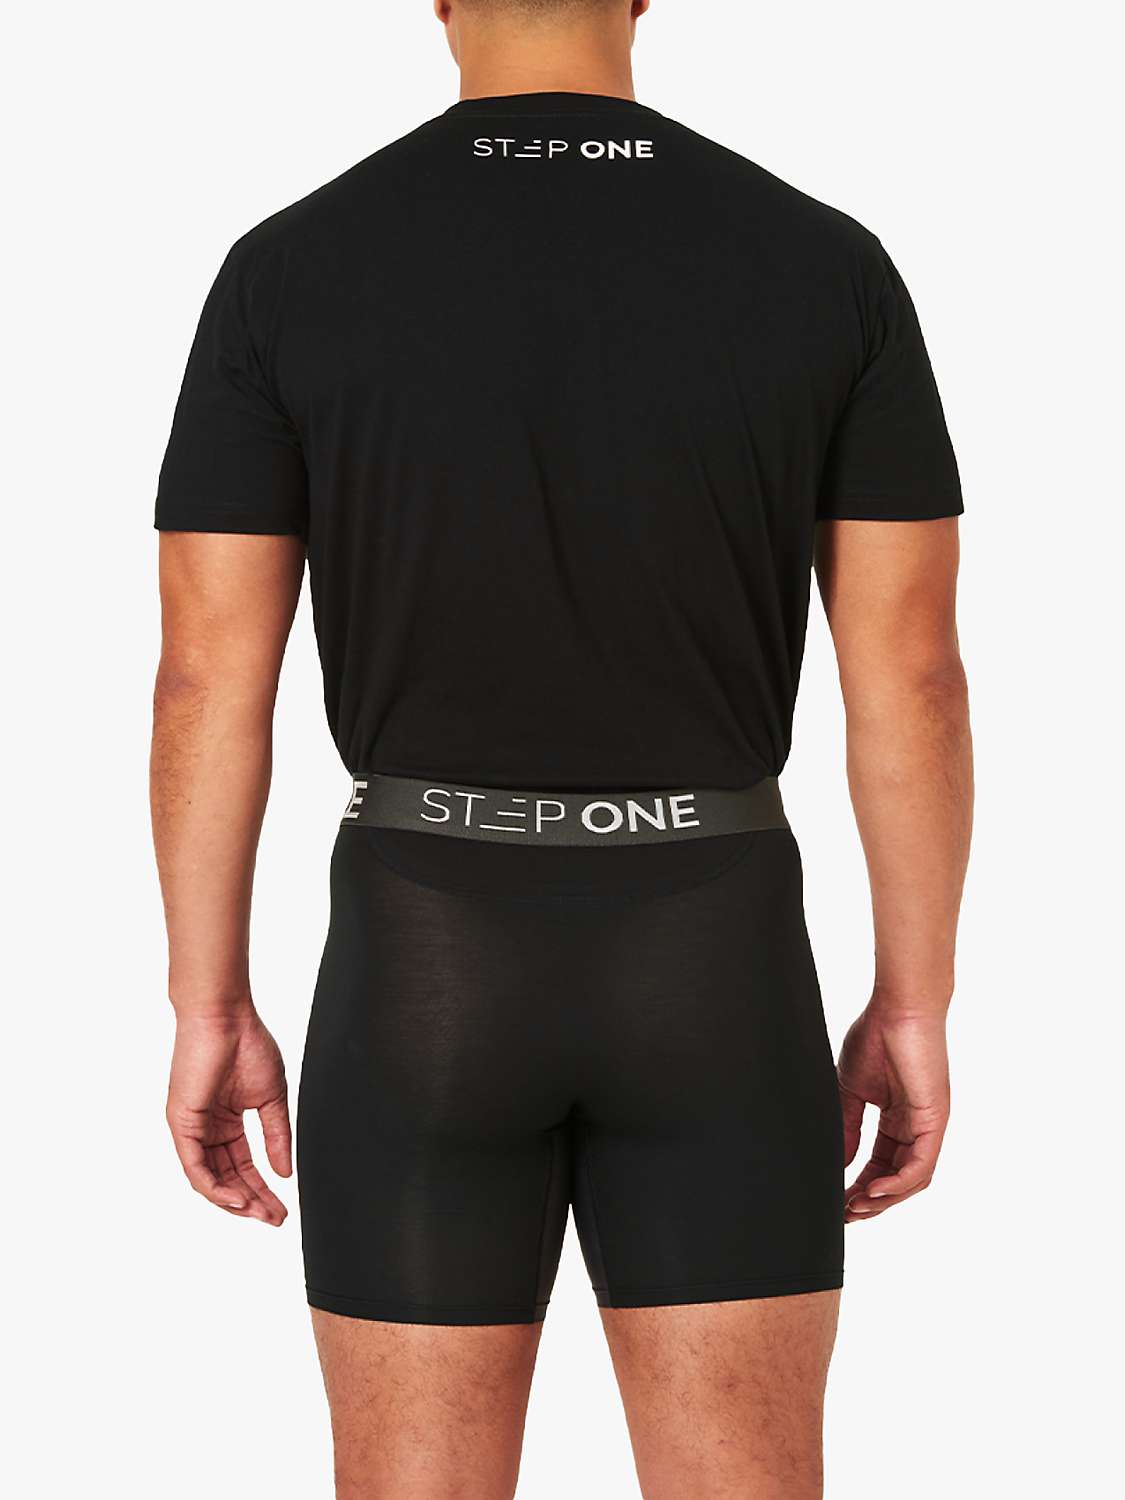 Buy Step One Bamboo Trunks, Pack of 3 Online at johnlewis.com